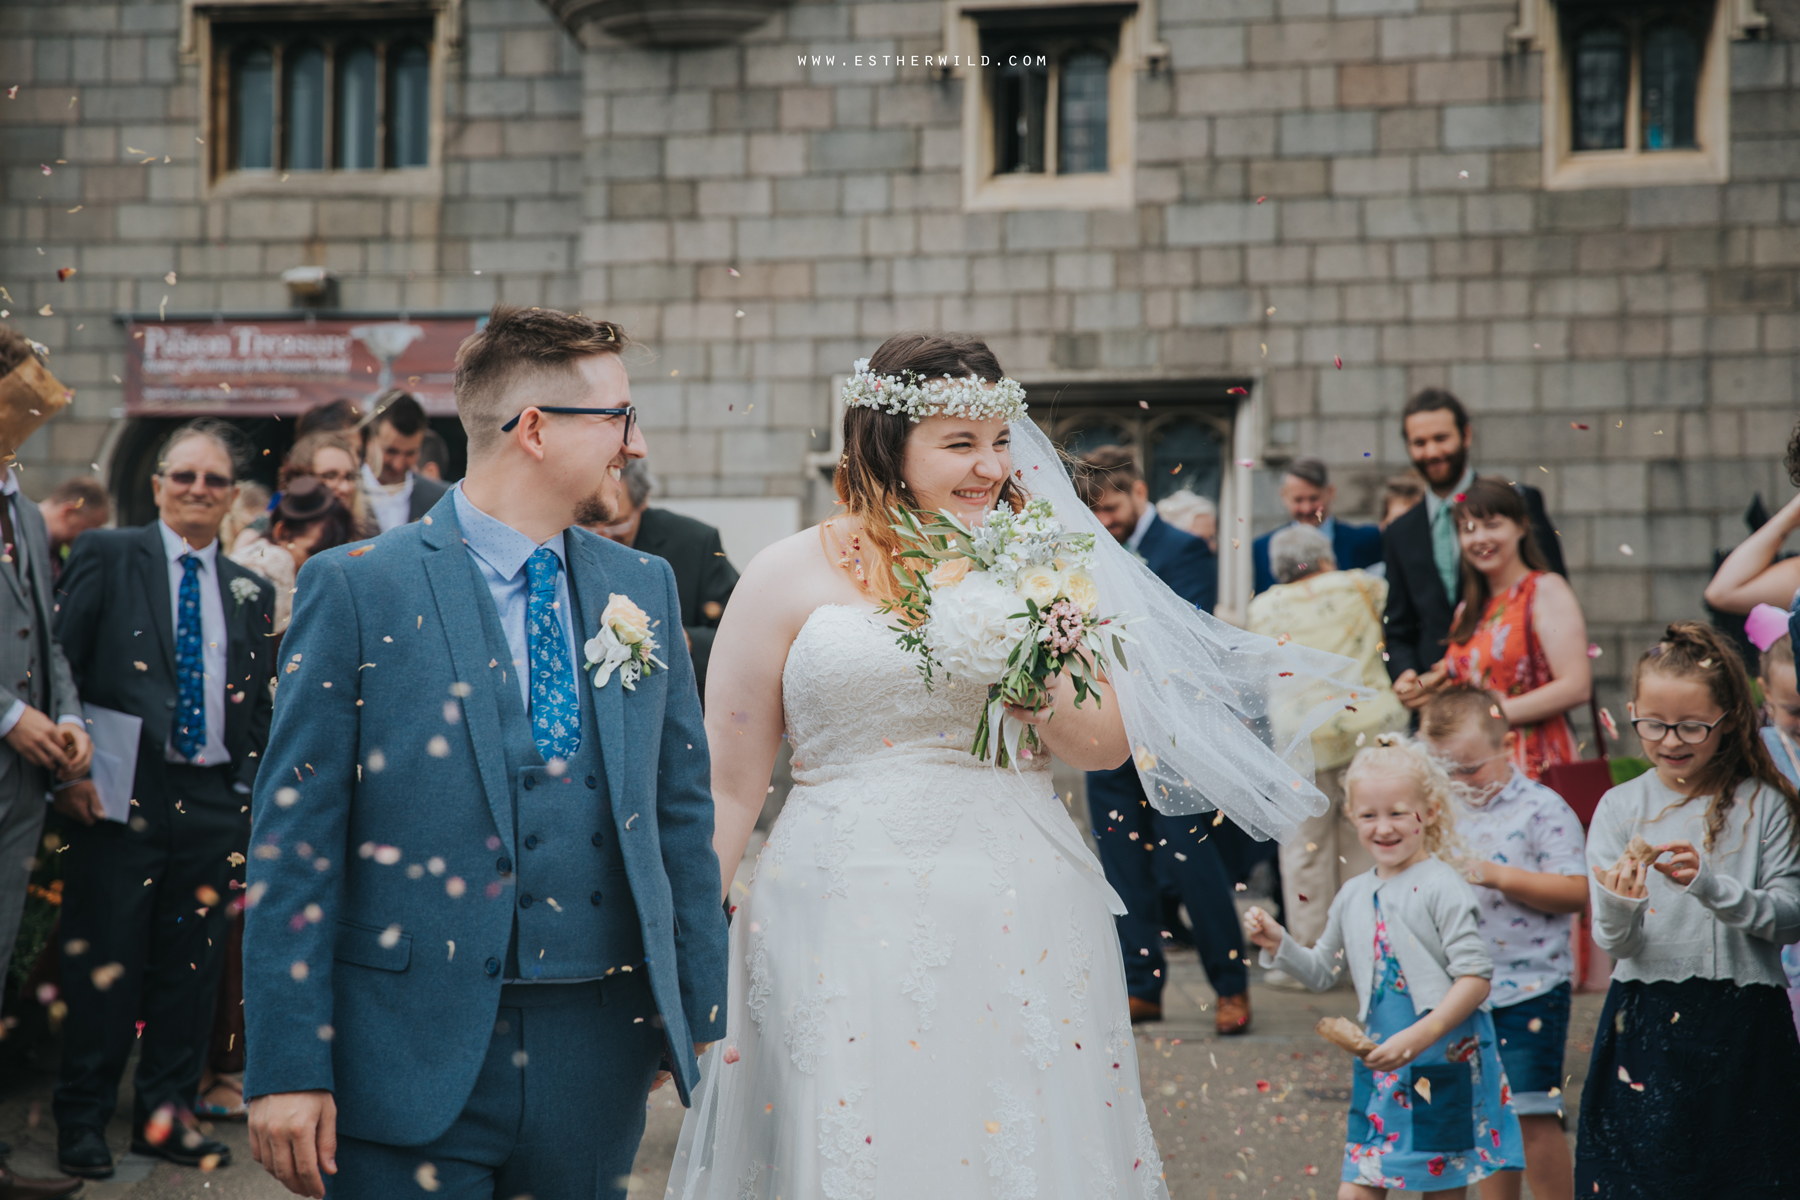 Norwich_Castle_Arcade_Grosvenor_Chip_Birdcage_Cathedral_Cloisters_Refectory_Wedding_Photography_Esther_Wild_Photographer_Norfolk_Kings_Lynn_3R8A1191.jpg